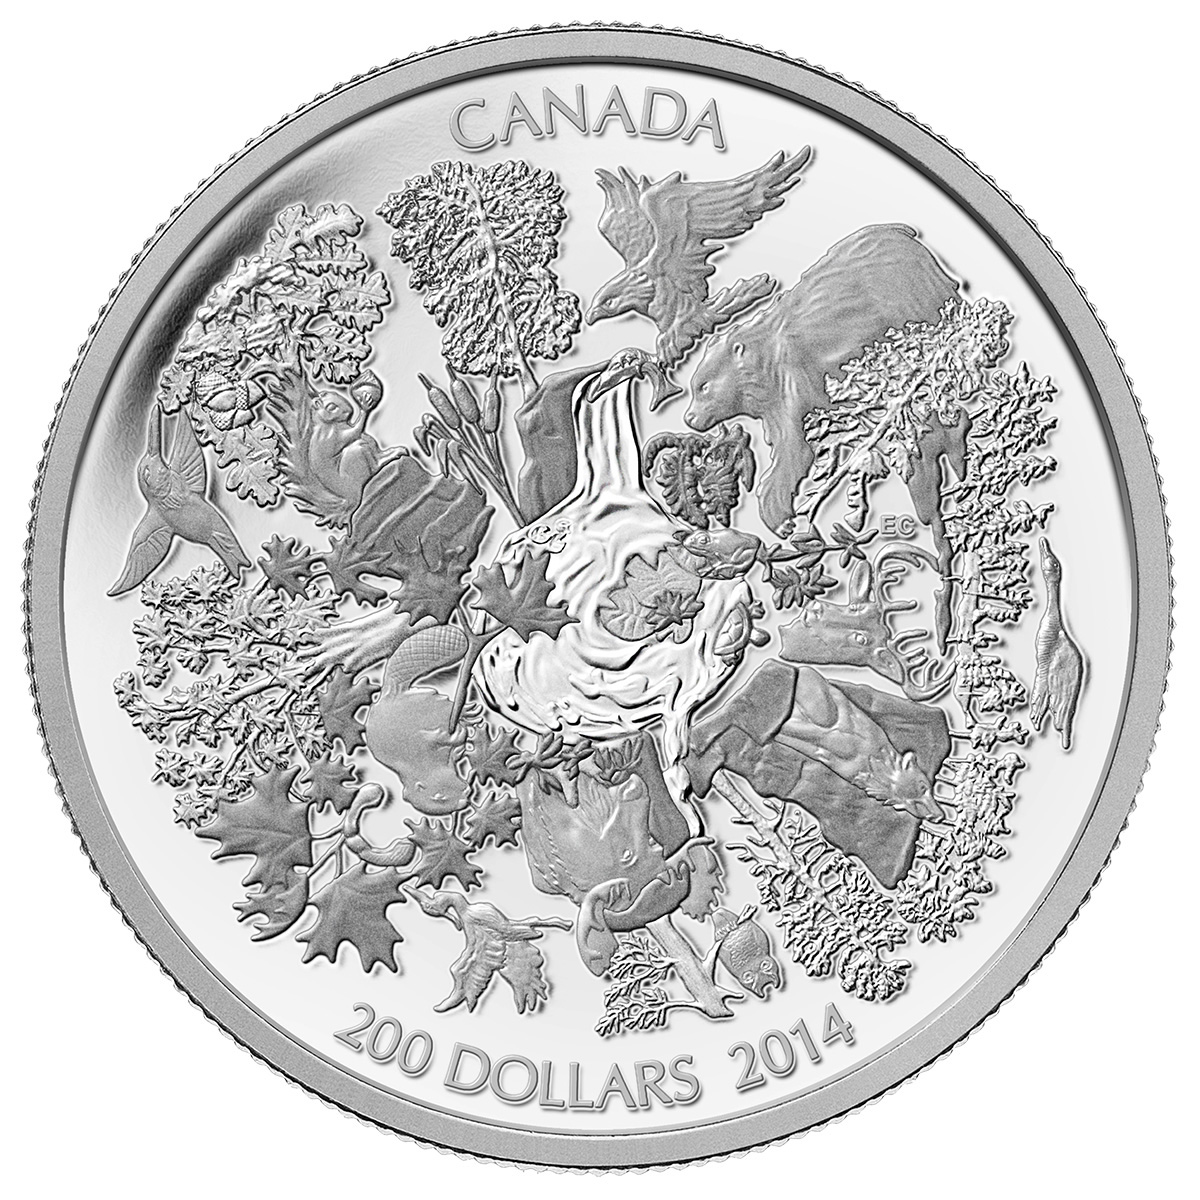 CANADA 2014 $200 Fine Silver Commemorative Coin - Towering Forests - $200 for $200 - #5 In Series